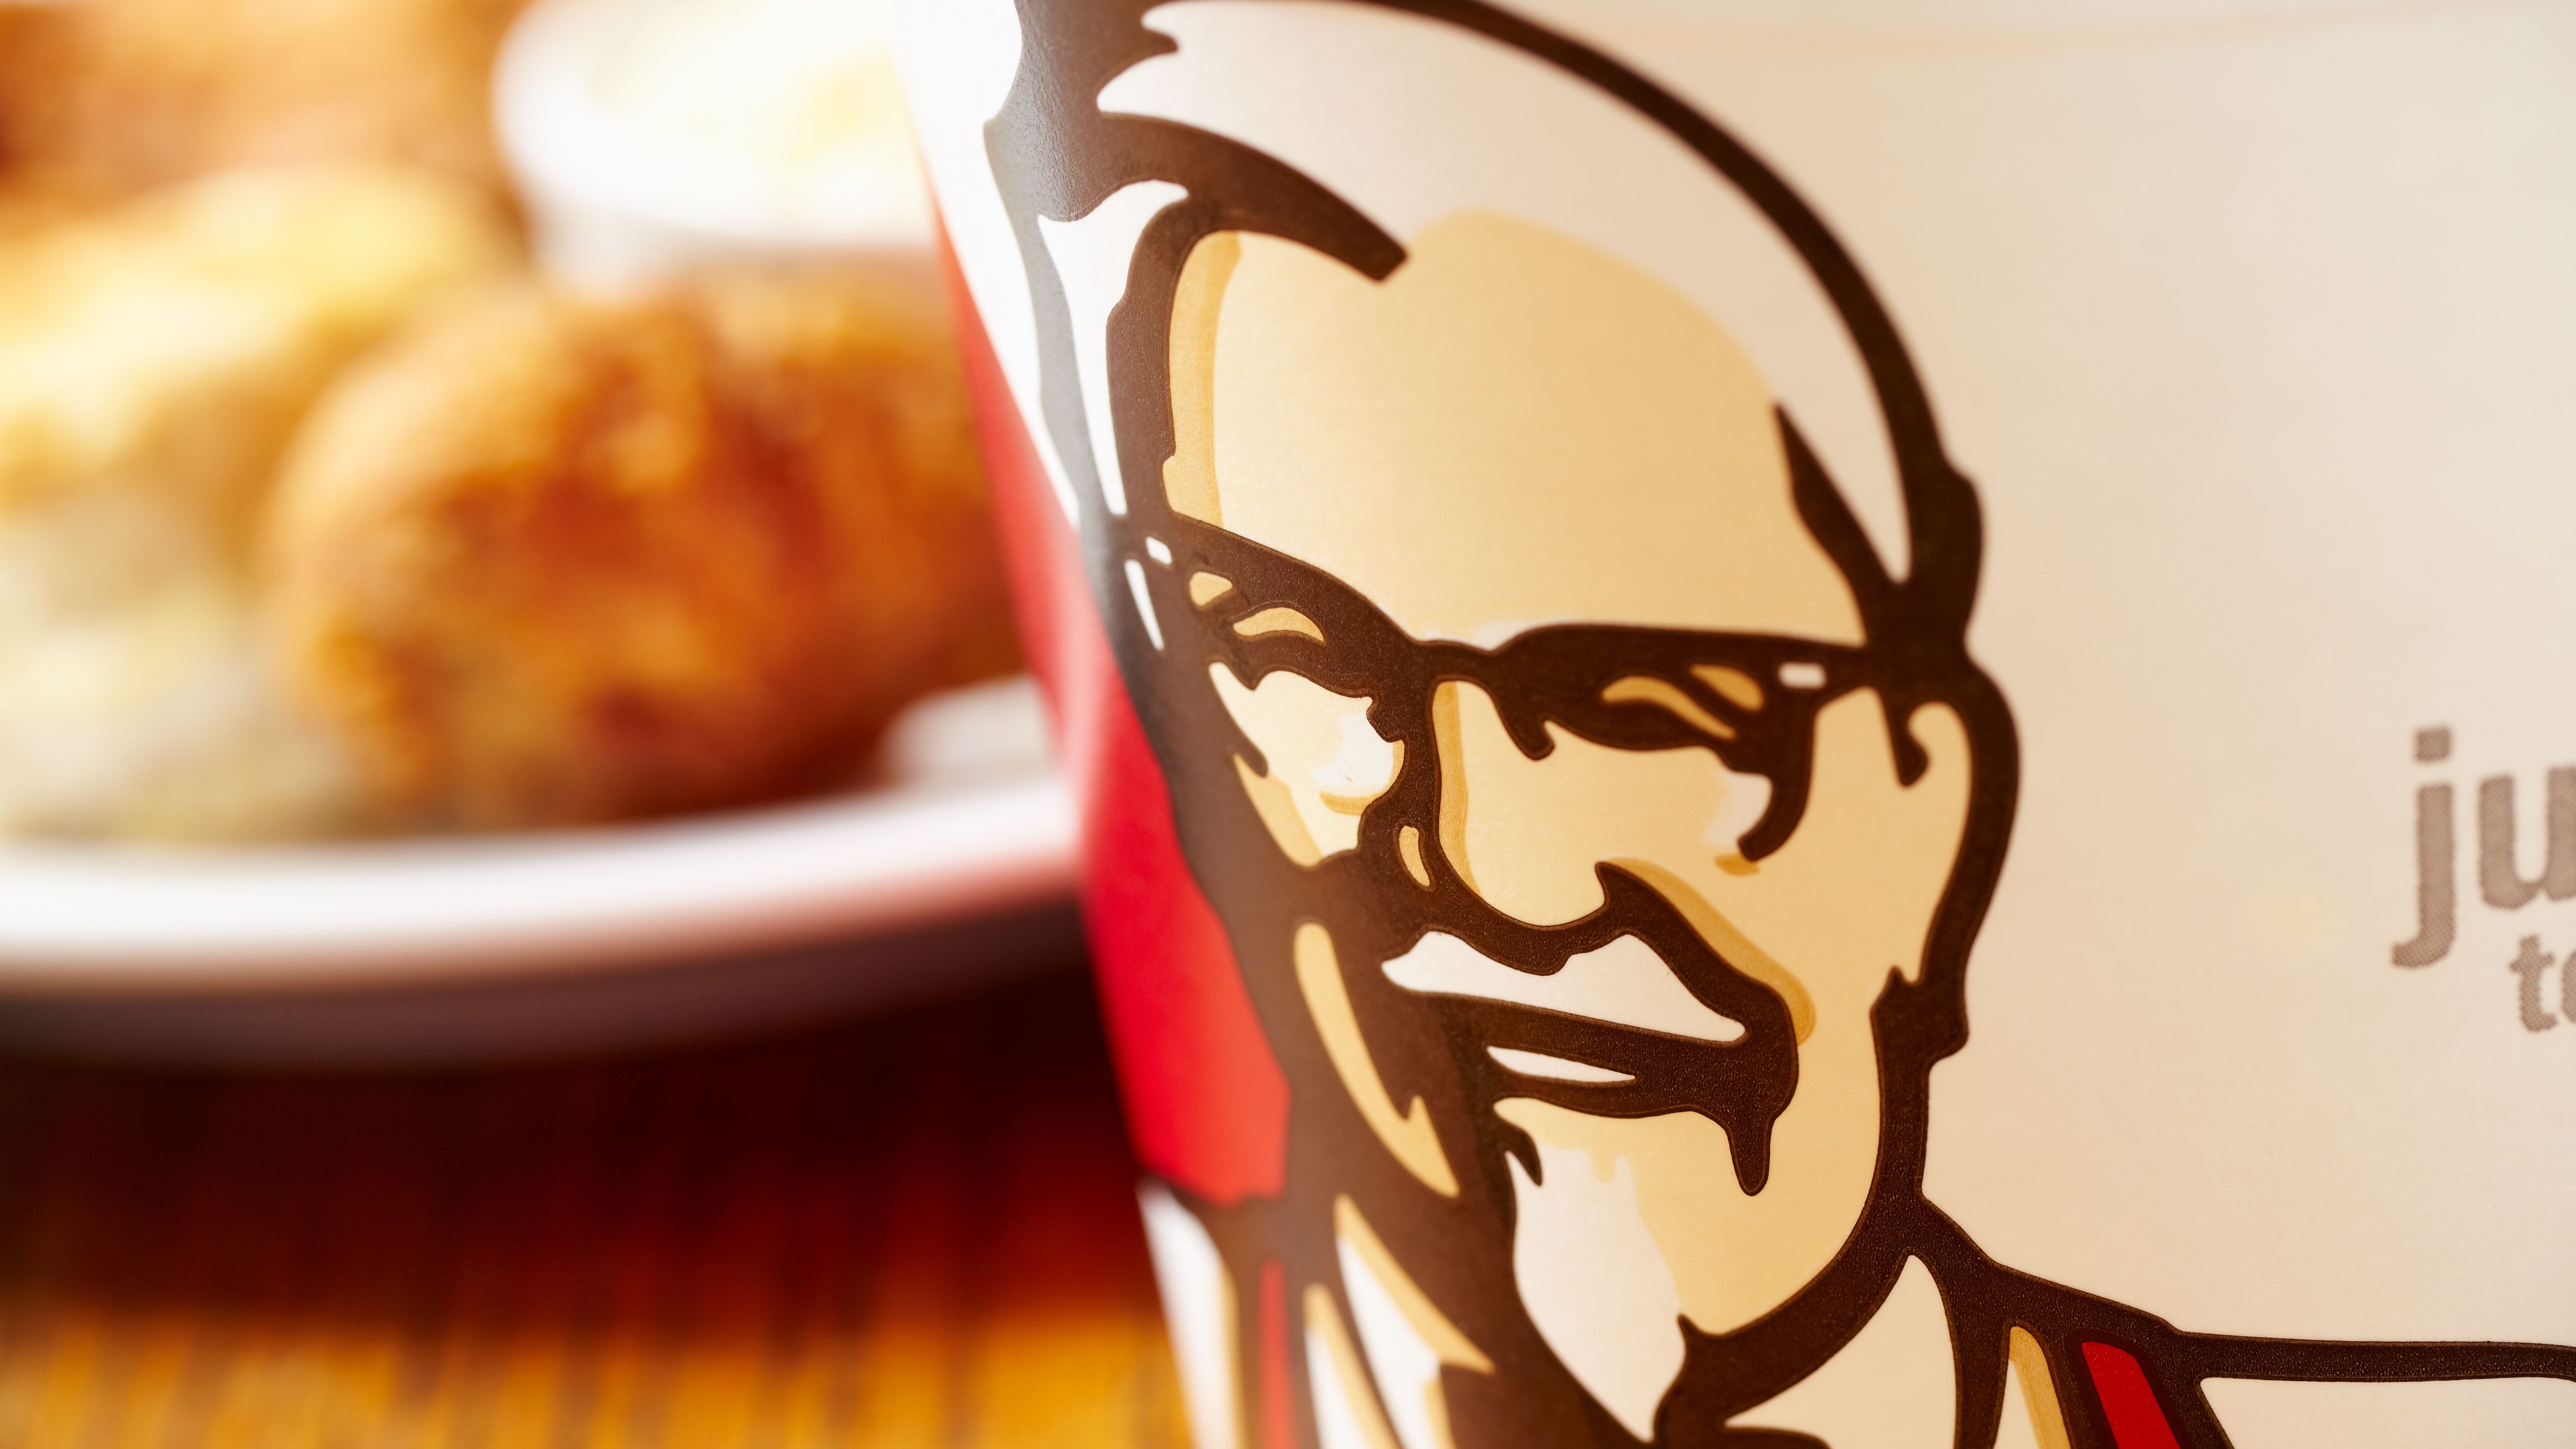 Mom says she was shamed for giving daughter KFC on her birthday